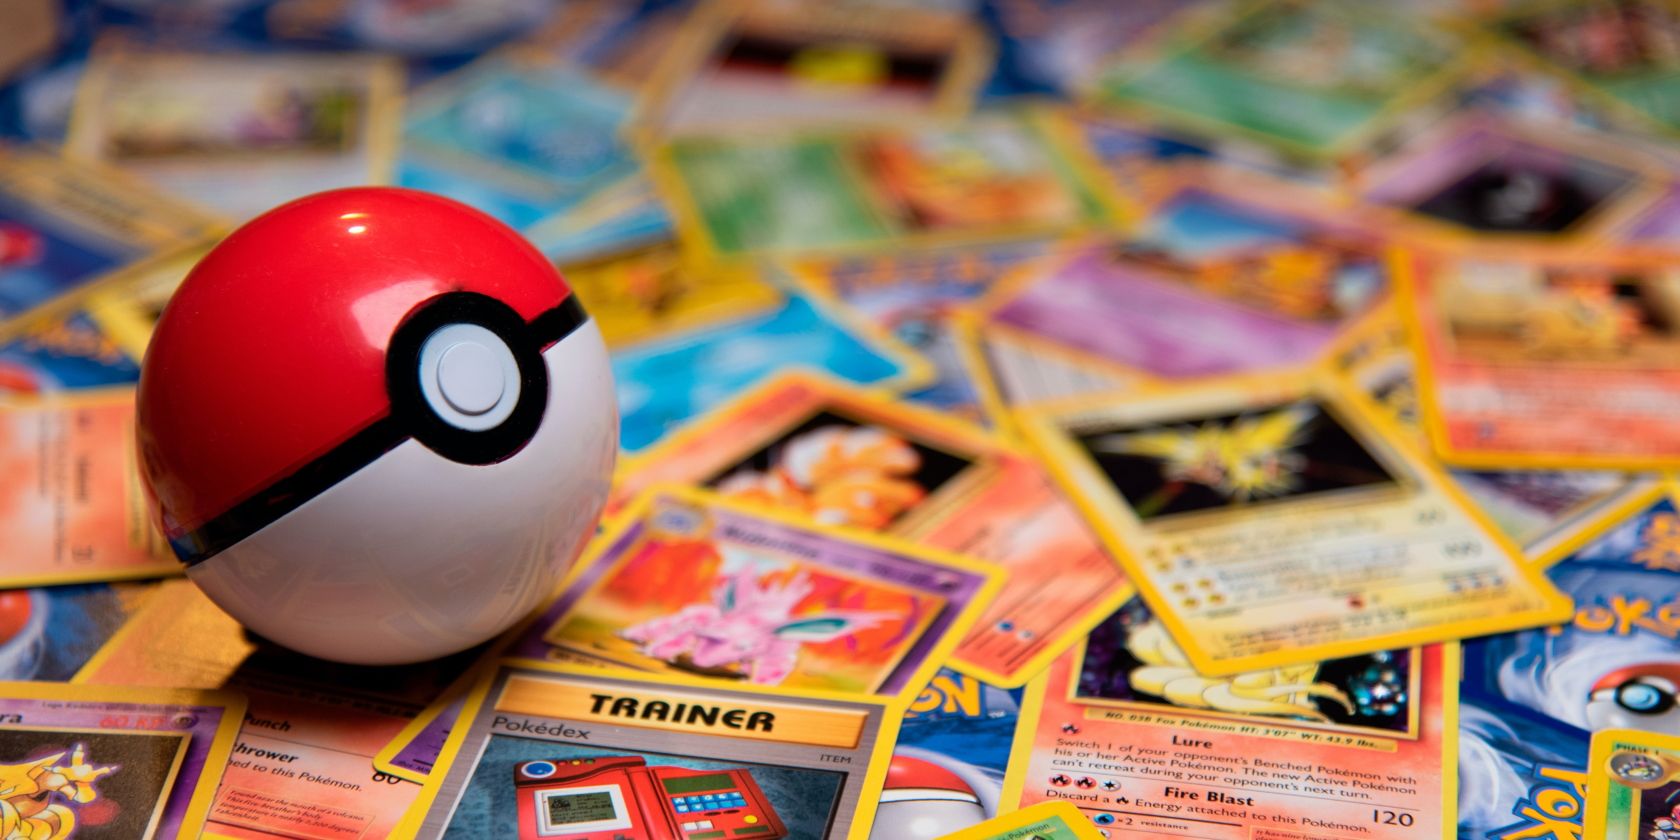 Pokeball on top of a pile of Pokemon cards photo